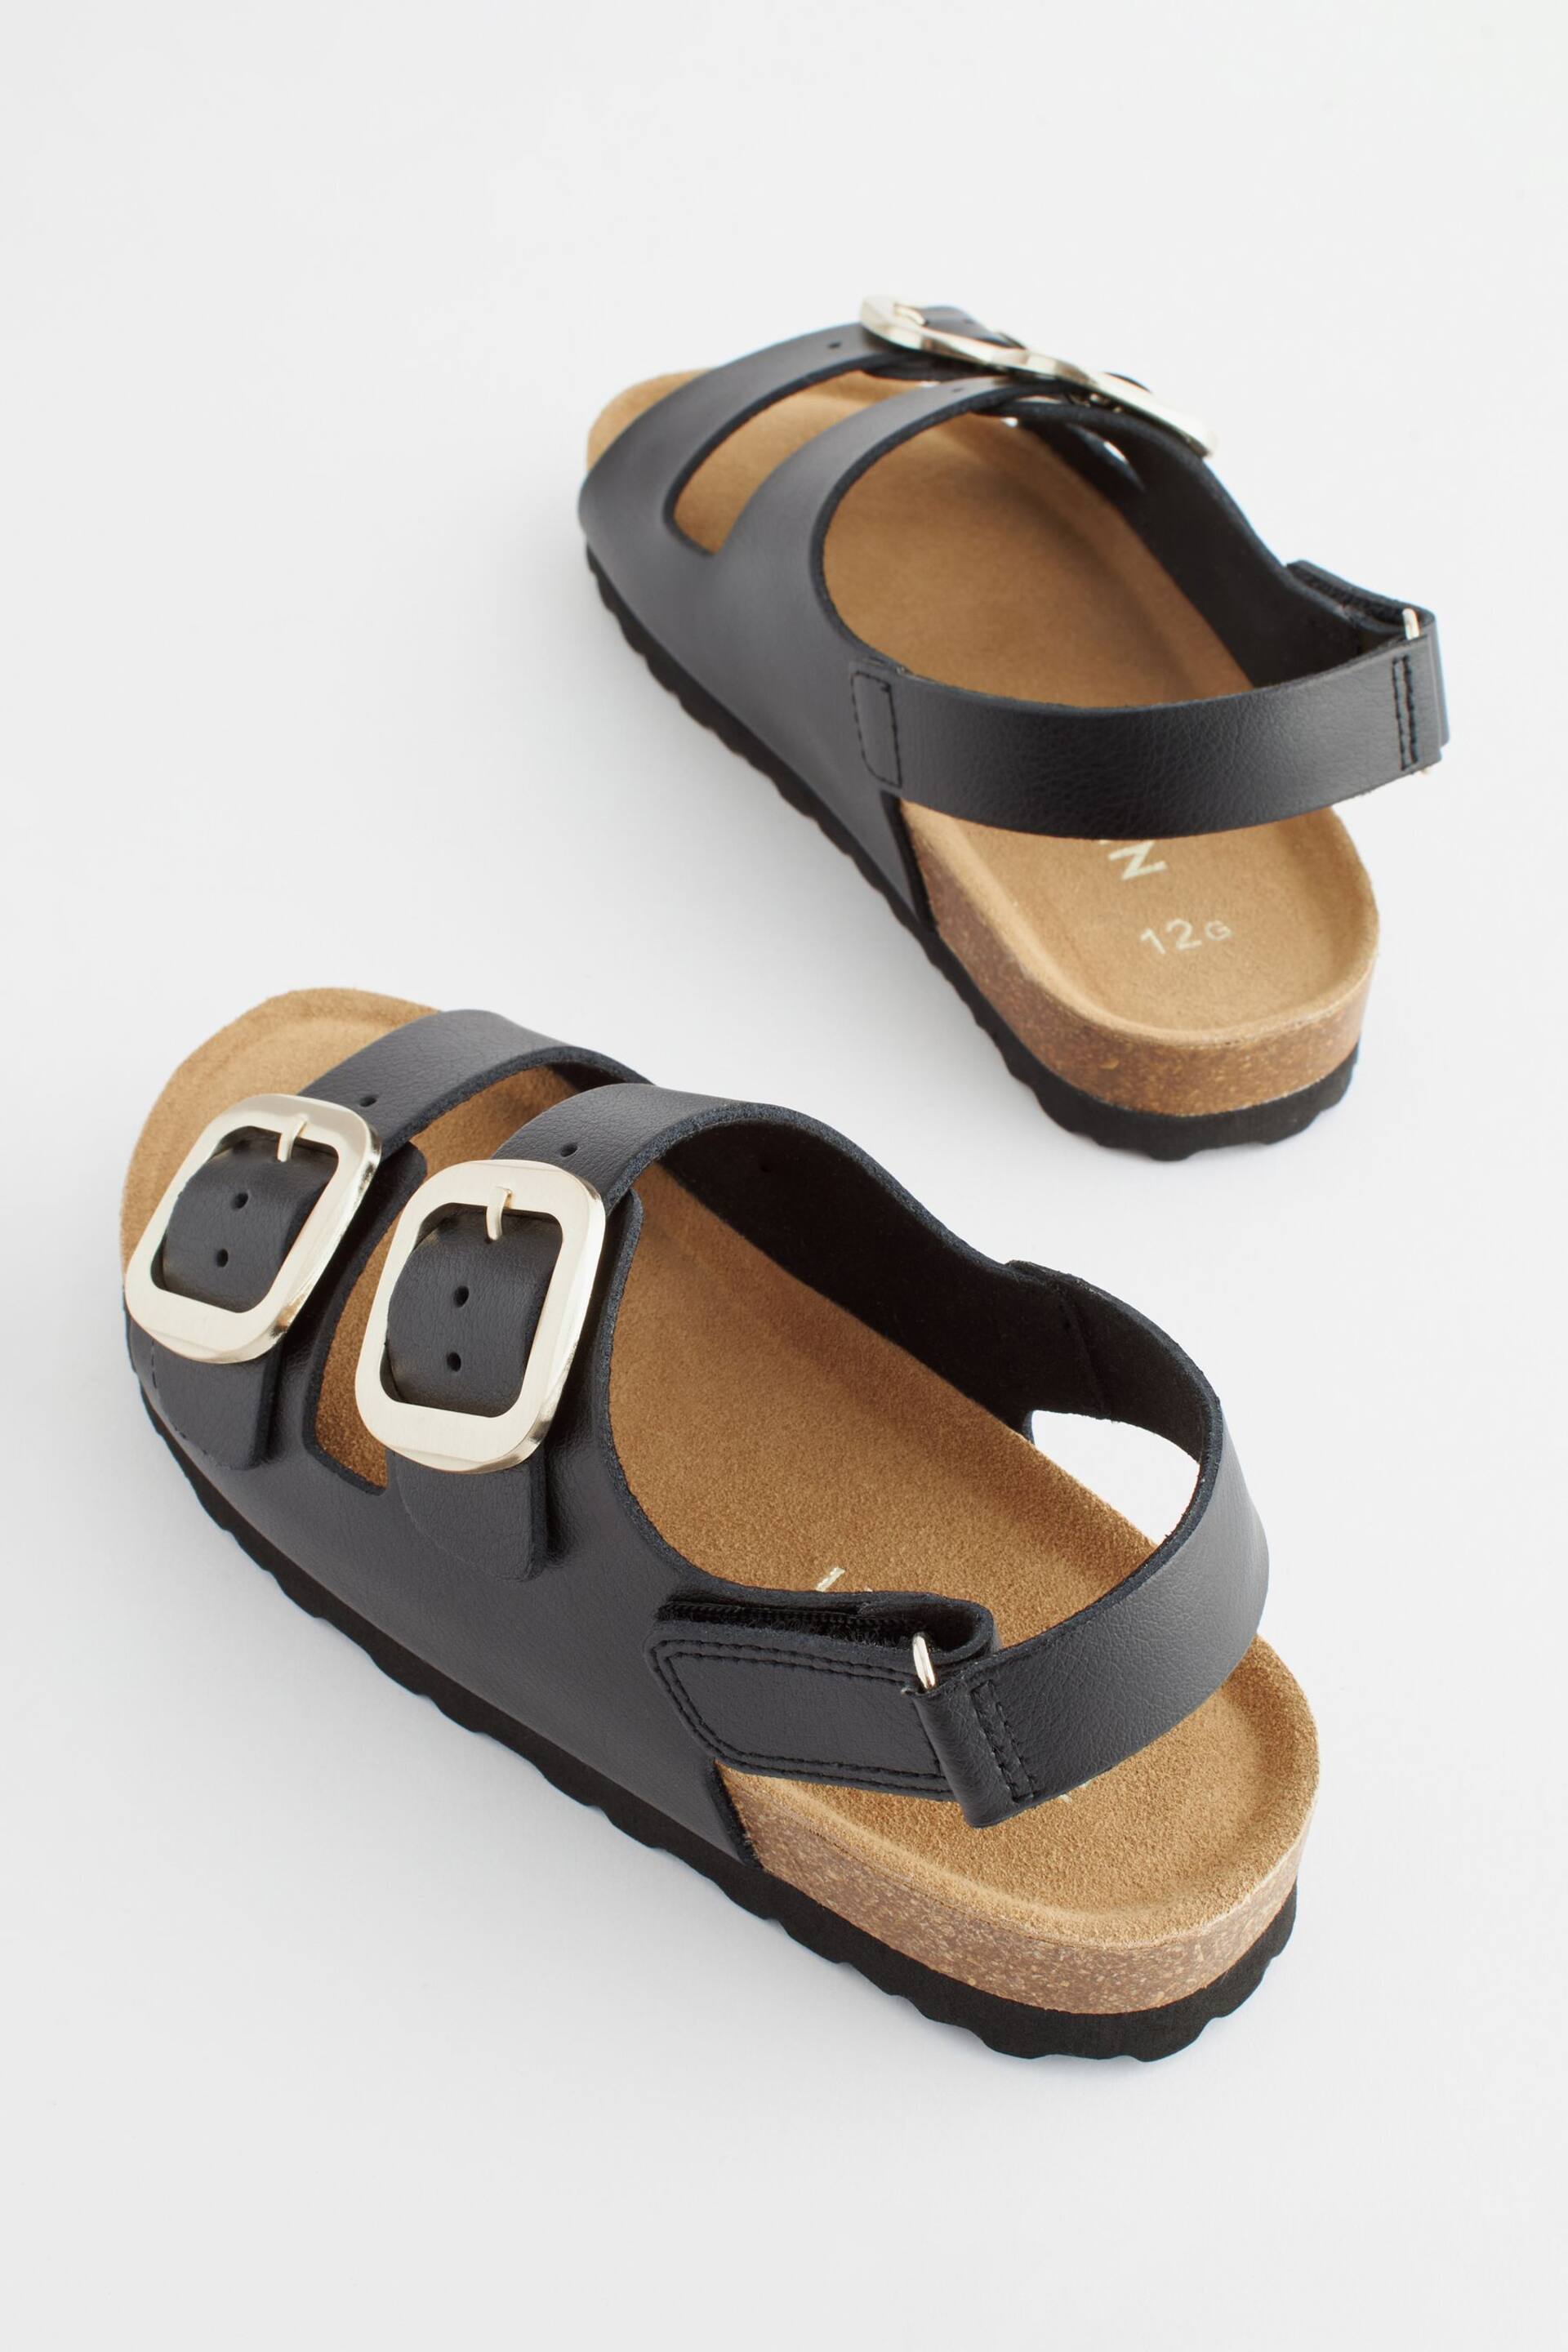 Black Leather Standard Fit (F) Two Strap Corkbed Sandals - Image 3 of 8